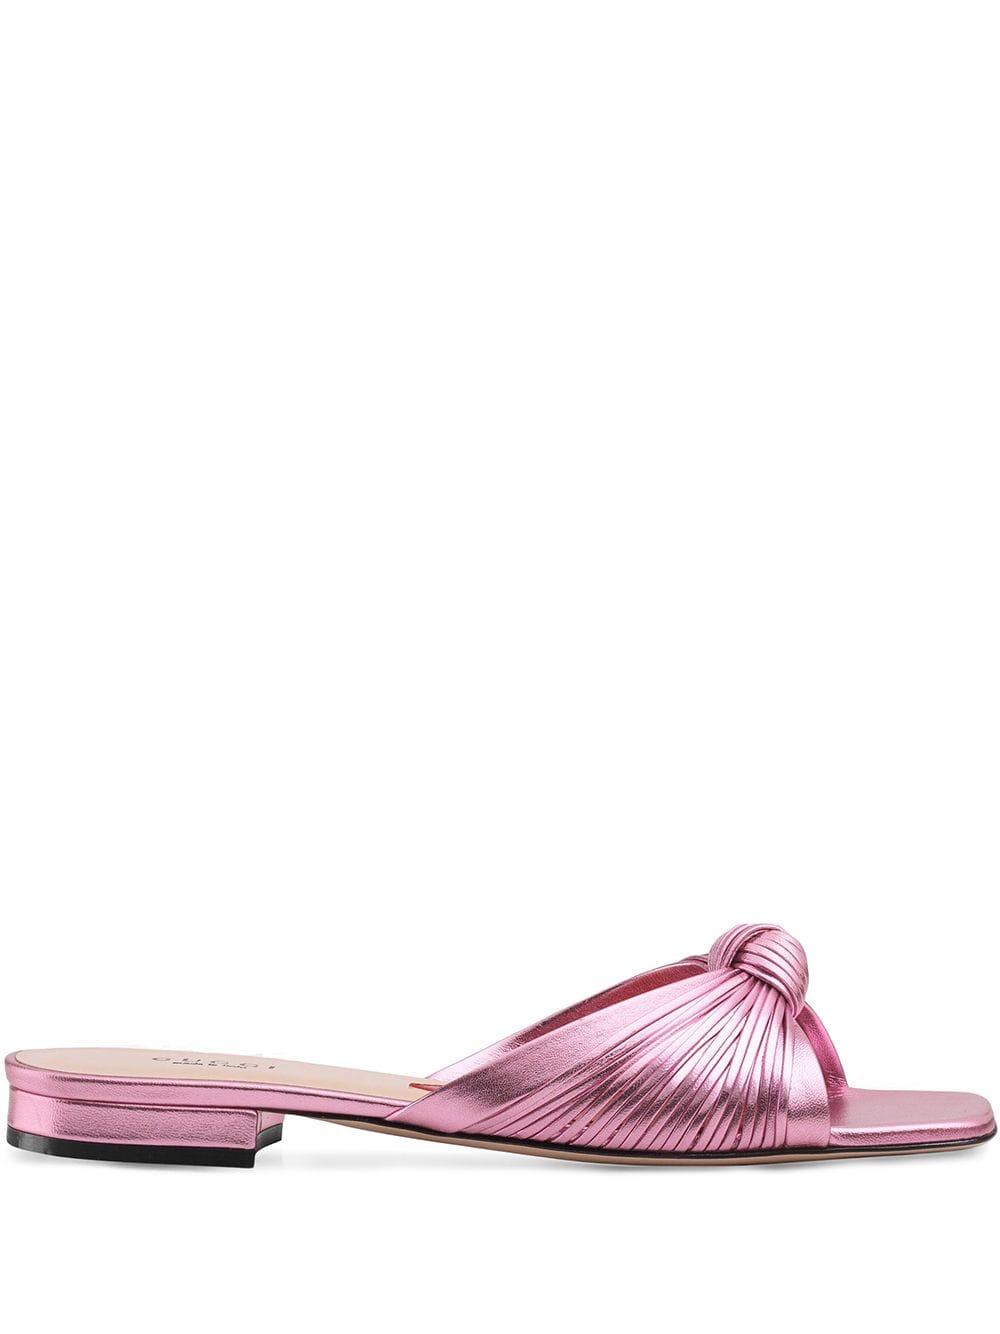 Gucci Leather Metallic Knot Sandals in Pink - Lyst